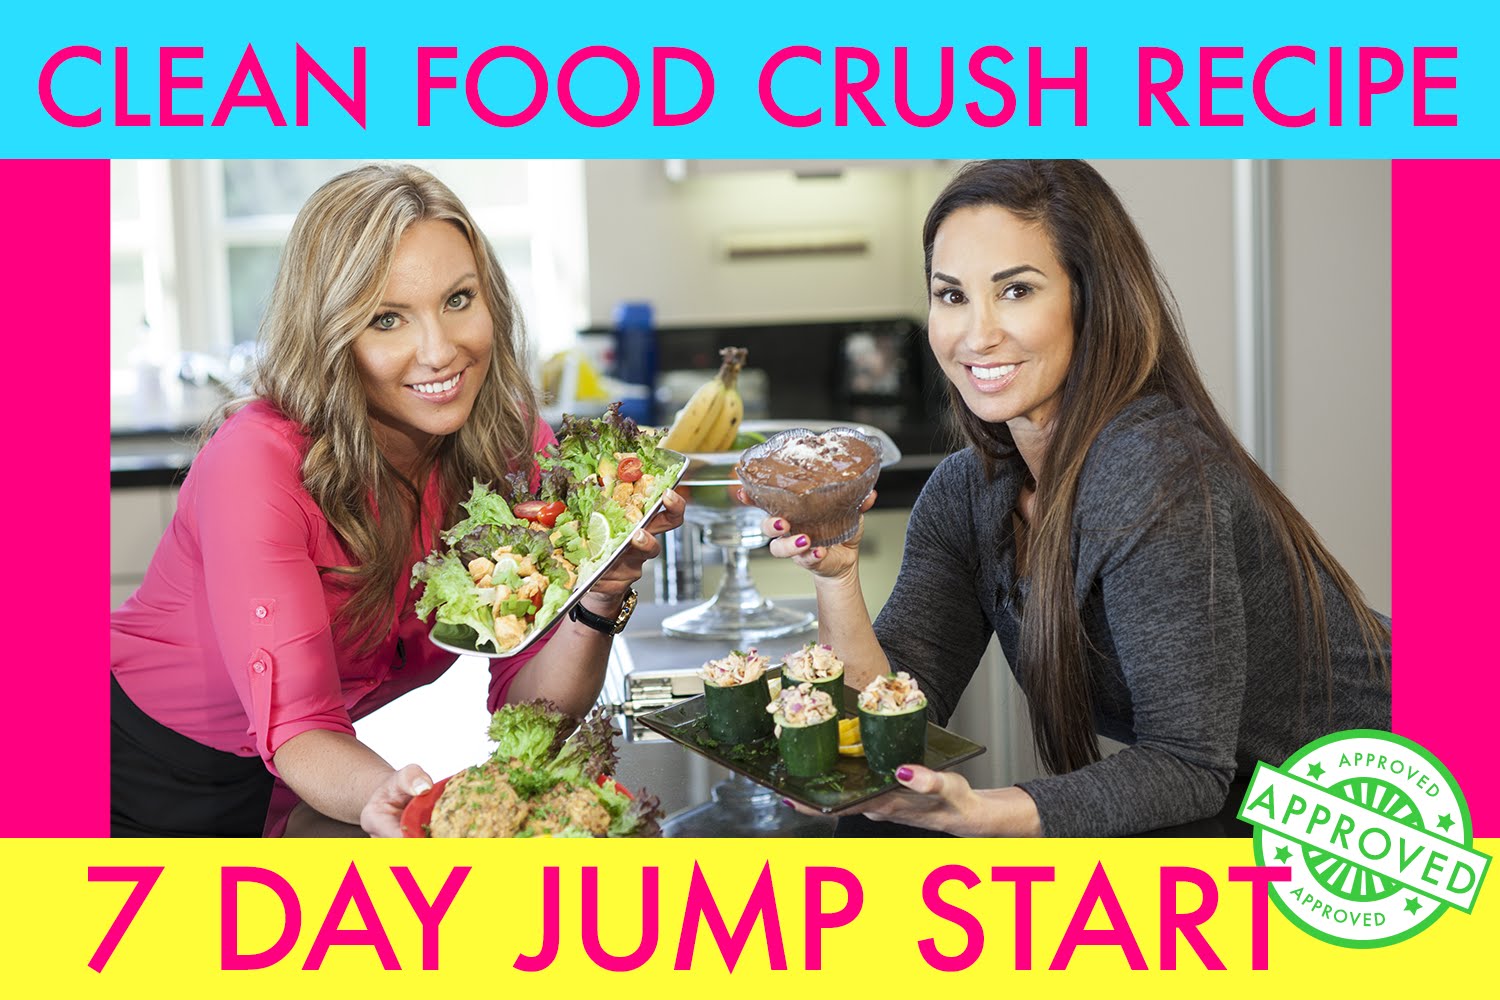 Clean Food Crush Recipe That Is 7 Day Jump Start Approved ...